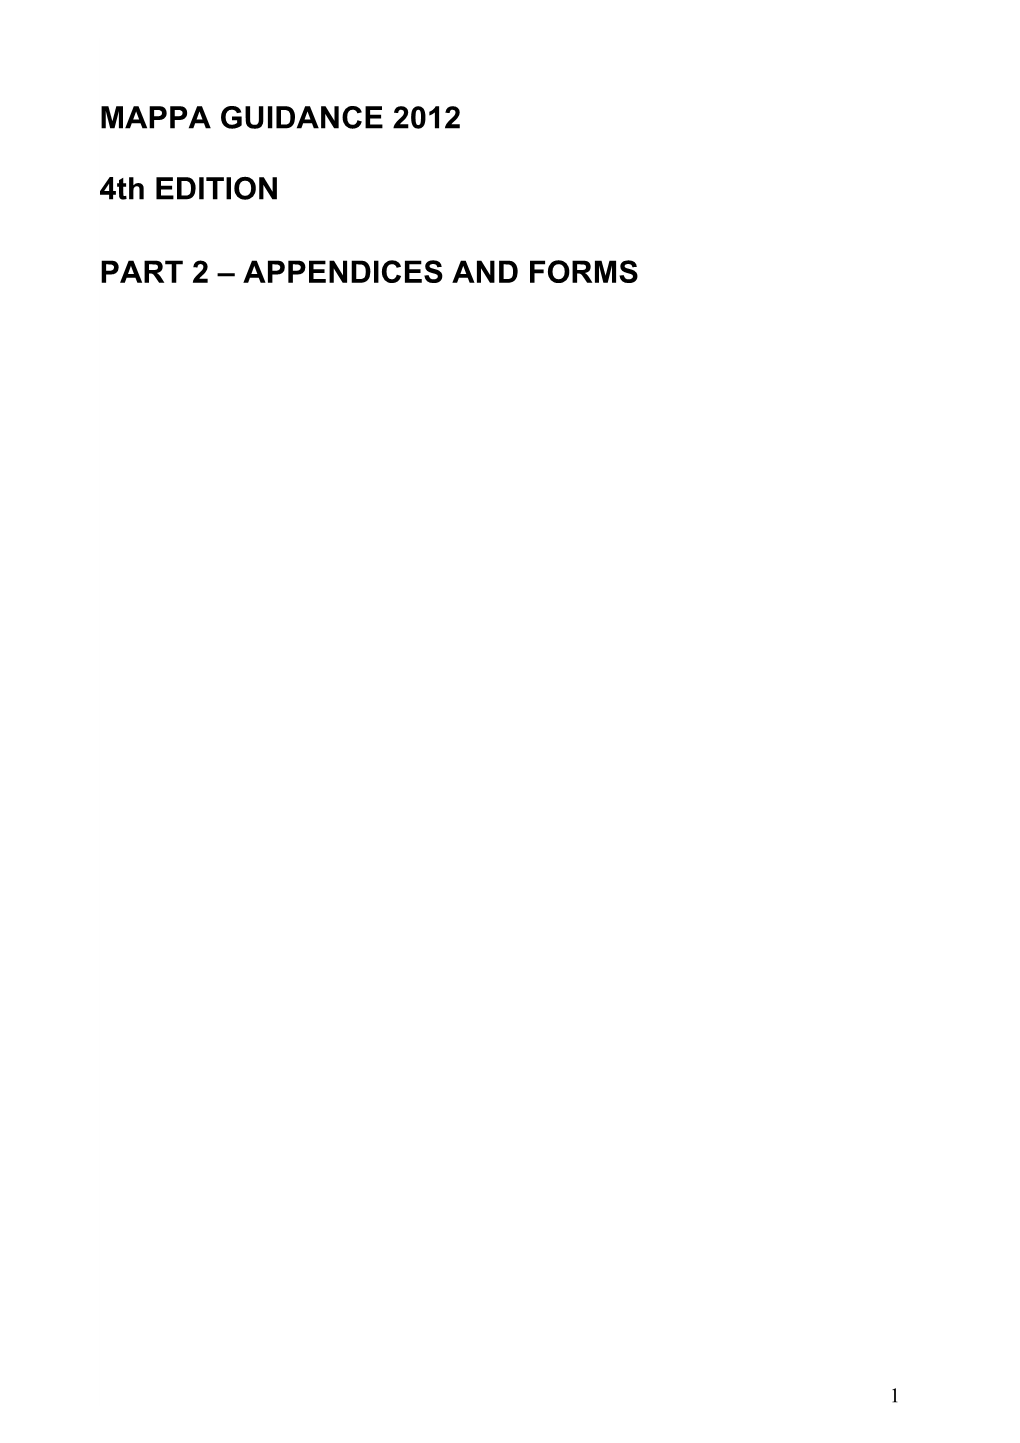 Part 2 Appendices and Forms